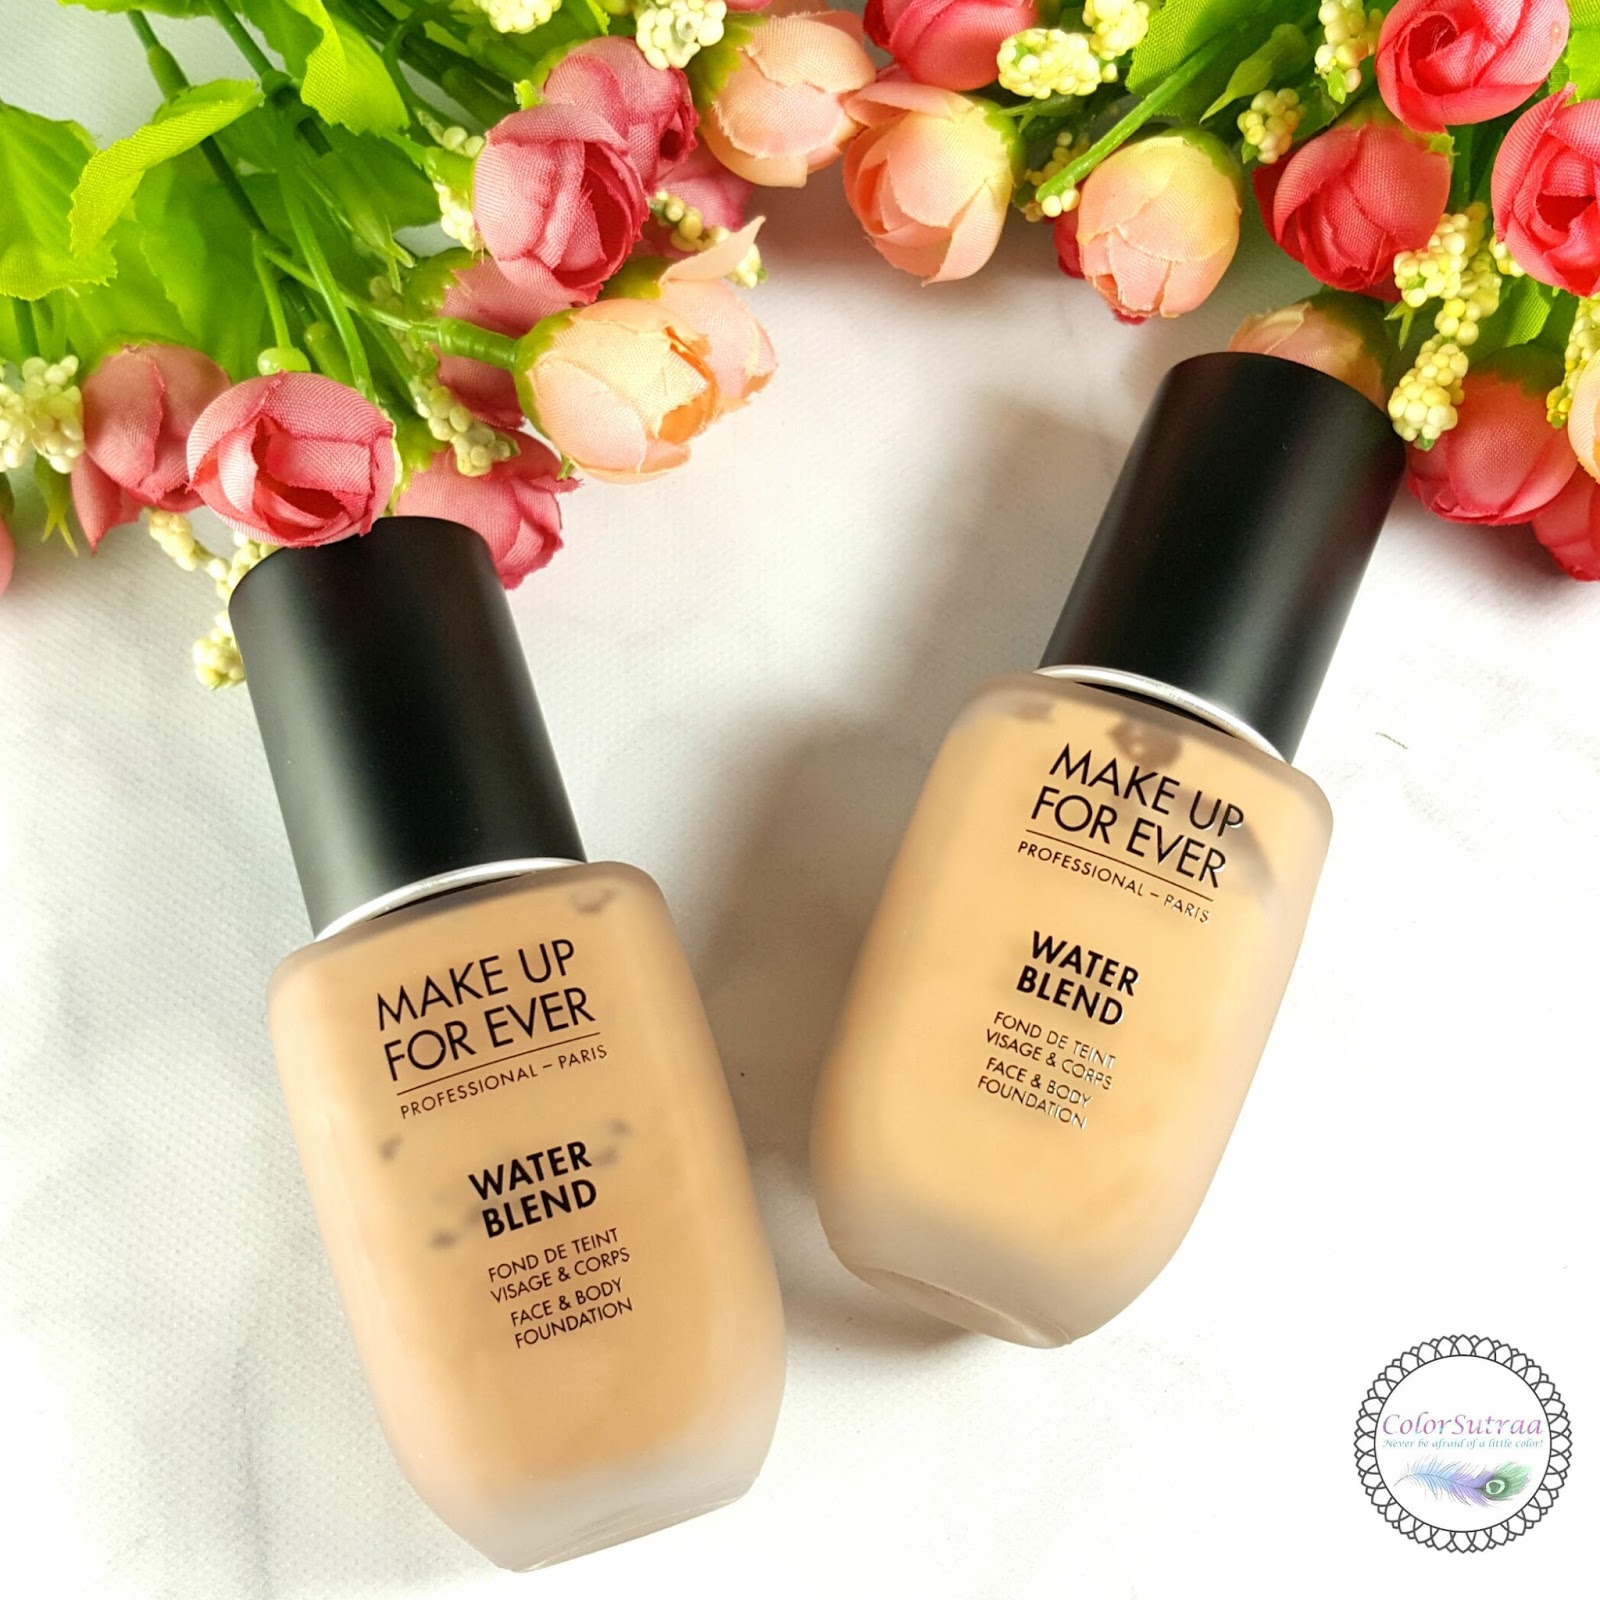 Get Dewy, Luminous, Skin with MAKE UP FOR NEW Blend Foundation! - ColorSutraa